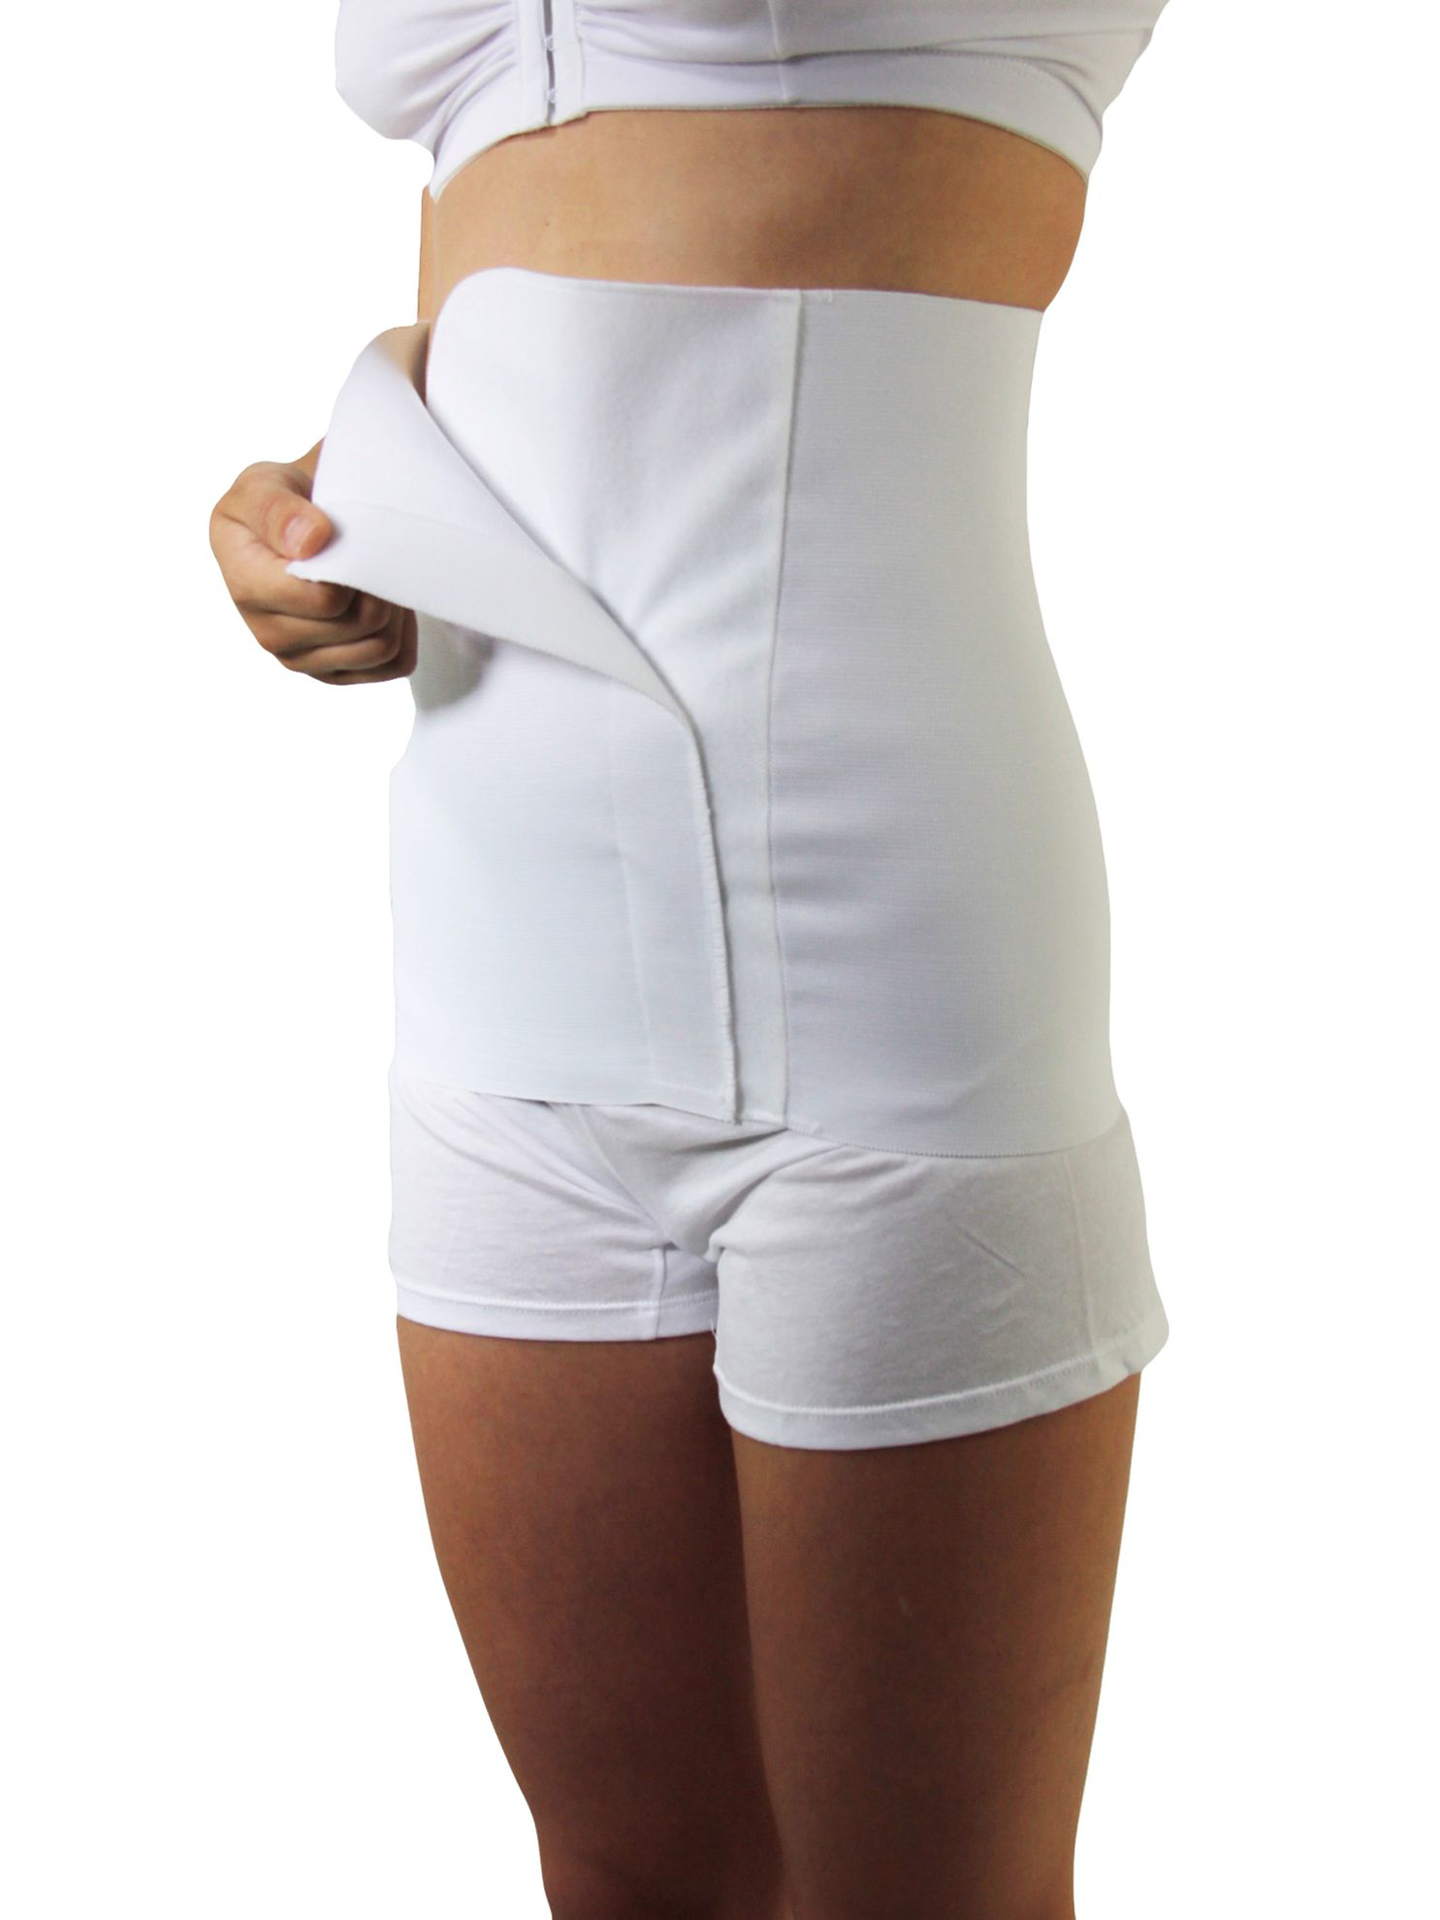 Abdominal Support Compression Underwear For LADIES > Maternity Support &  Hernia